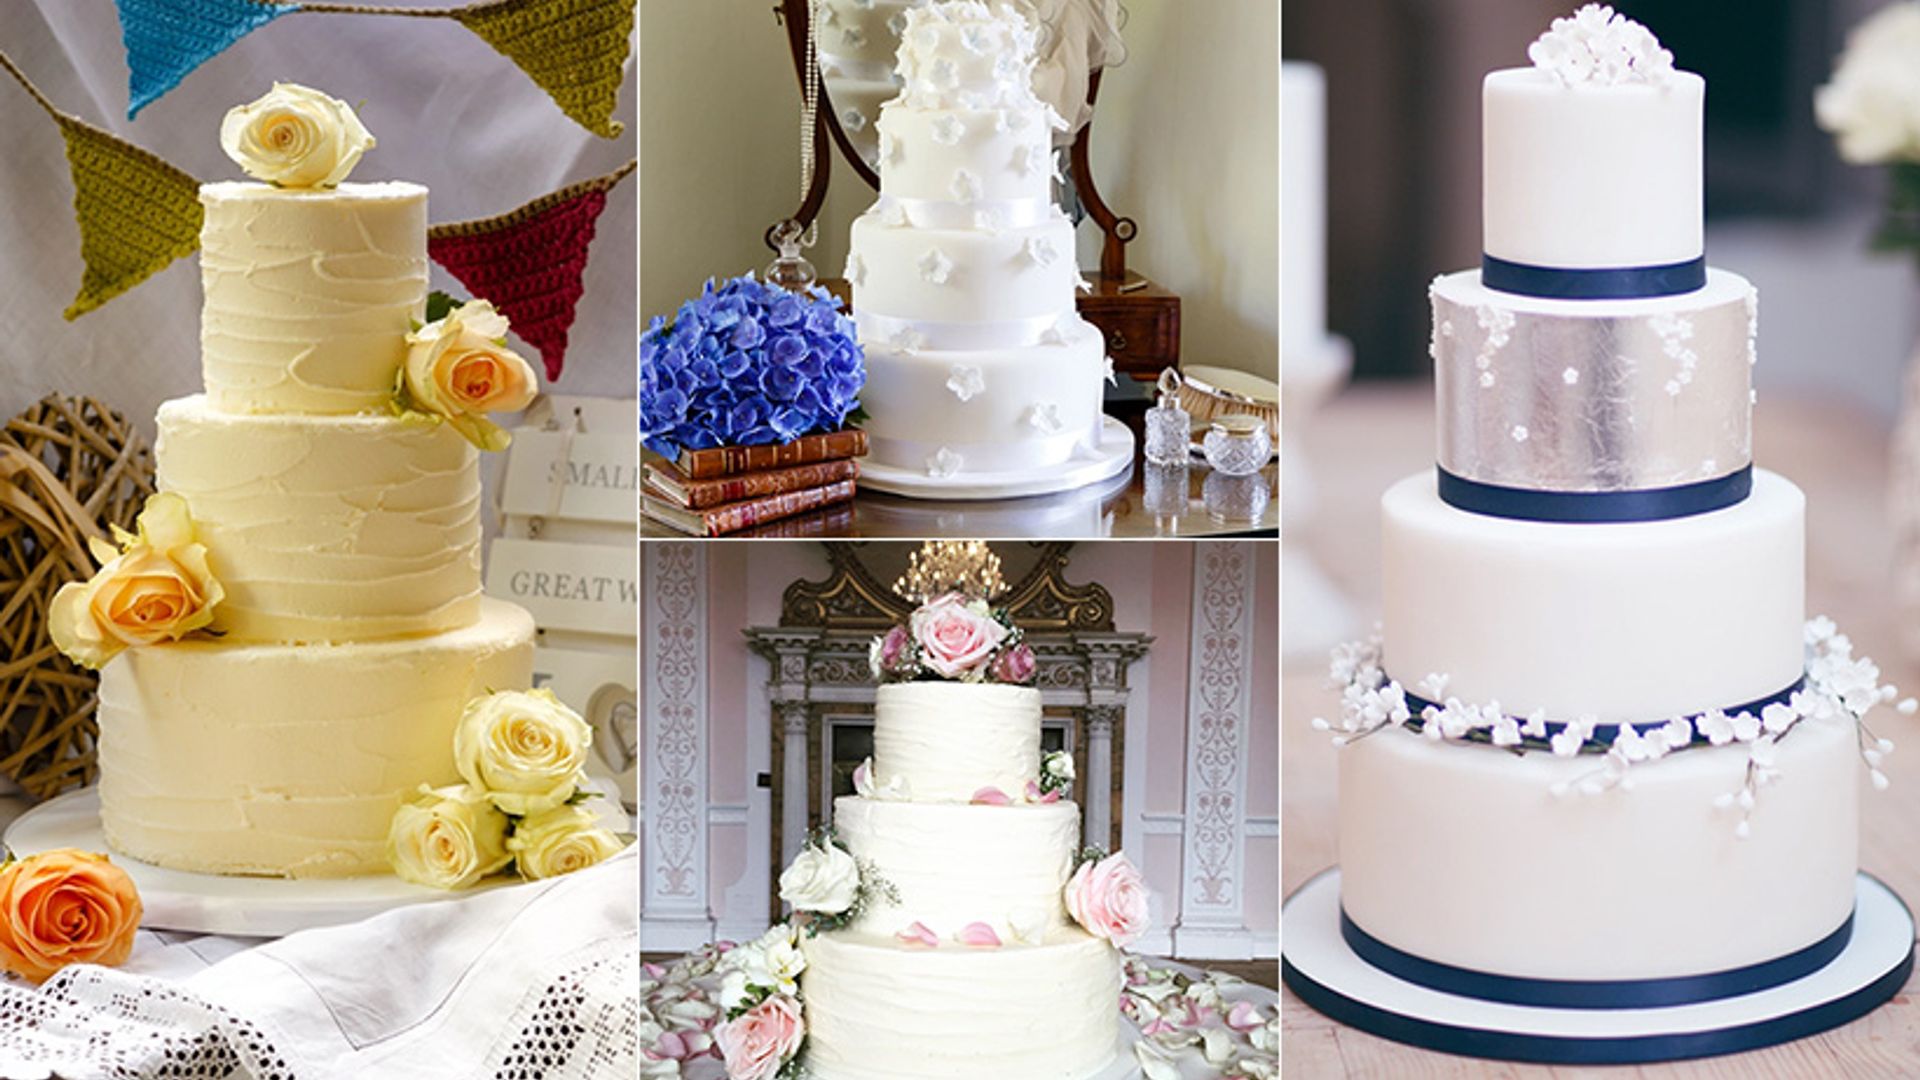 The prettiest wedding cake ideas and inspiration